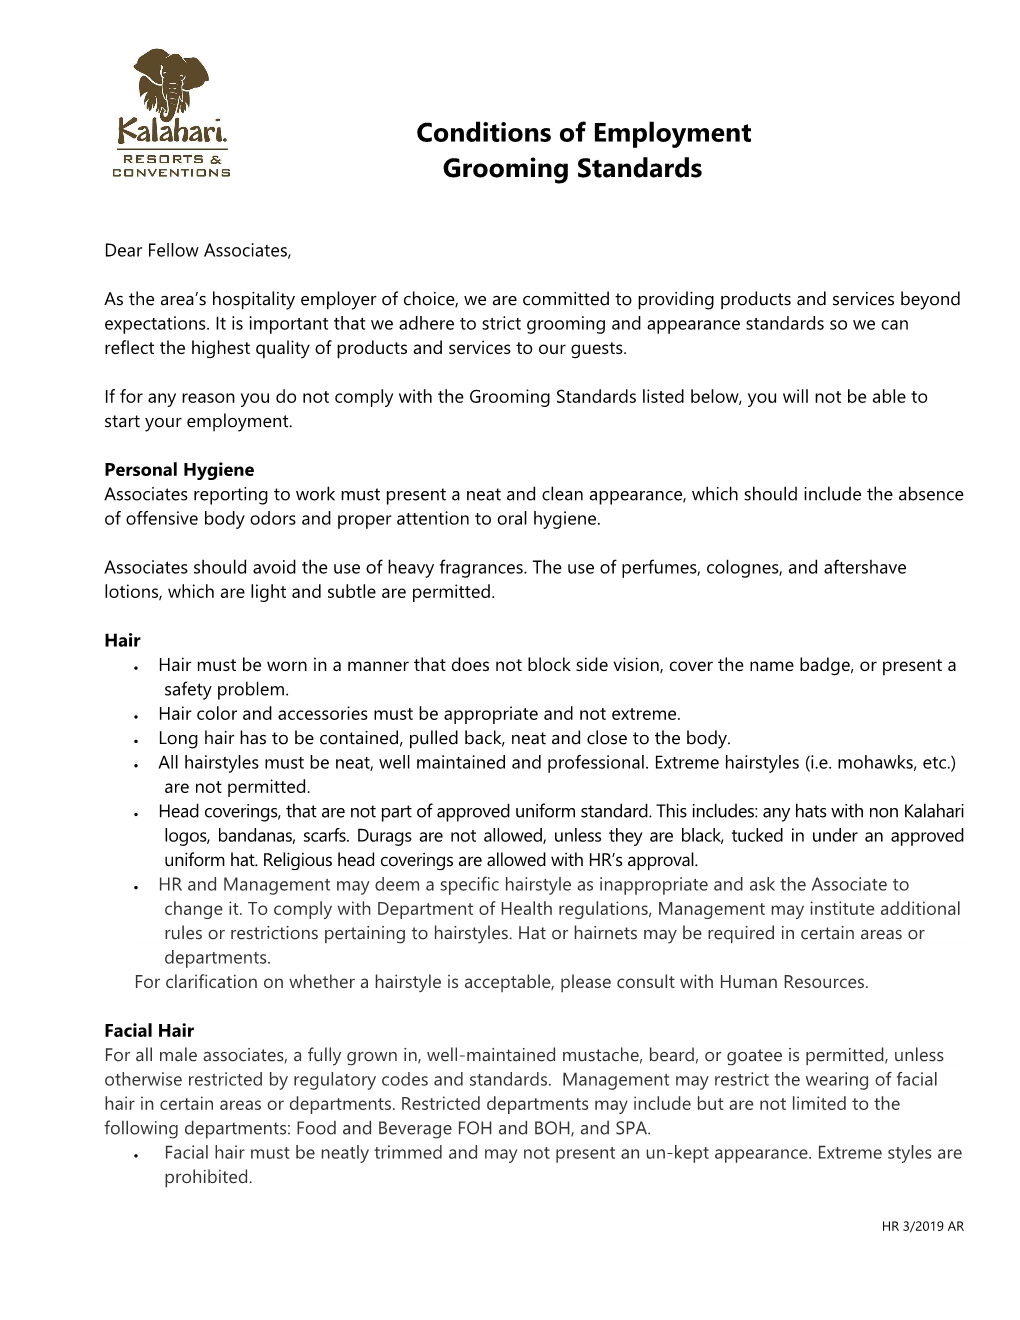 Conditions of Employment Grooming Standards